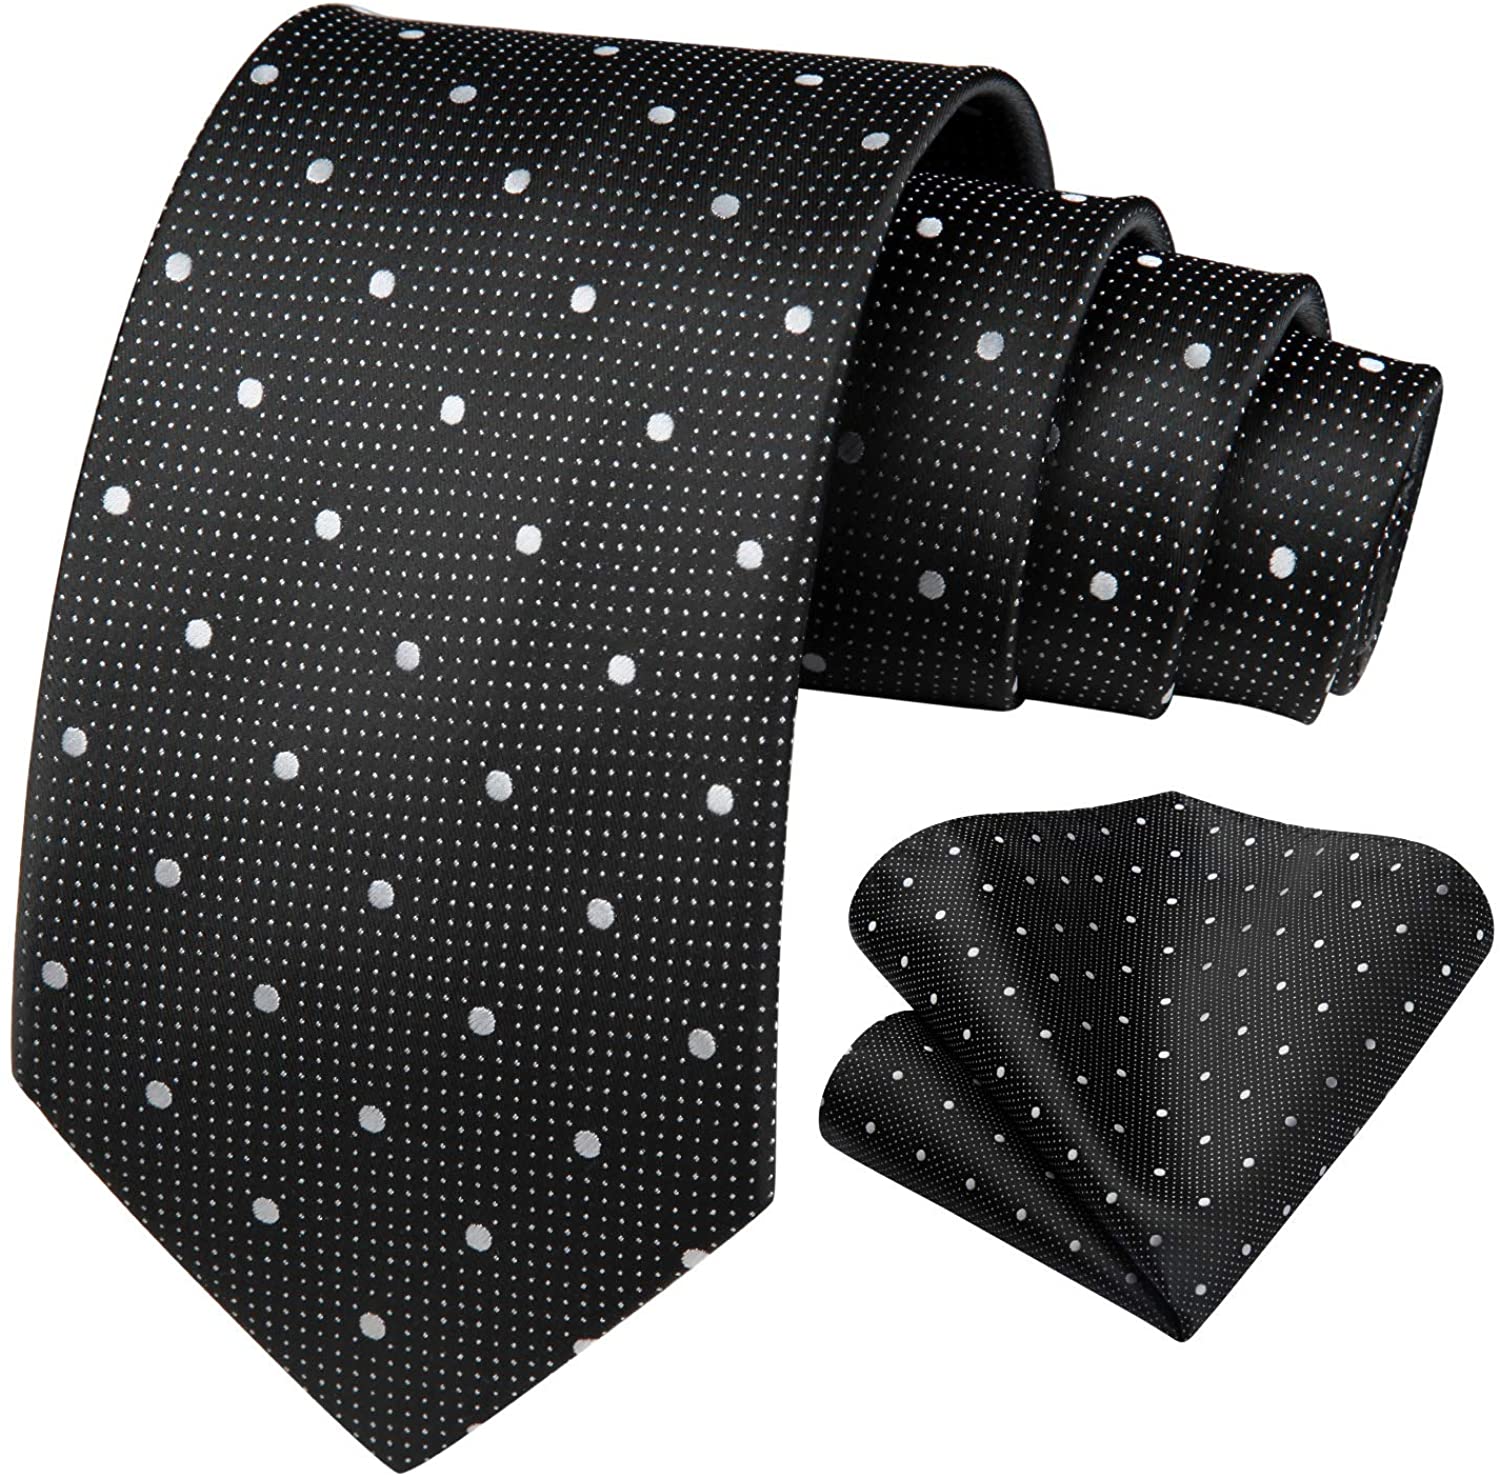 Classic Men's Tie & Handkerchief Woven Checkered Striped 61 Extra Long Polka Dots Necktie Pocket Square Set Business